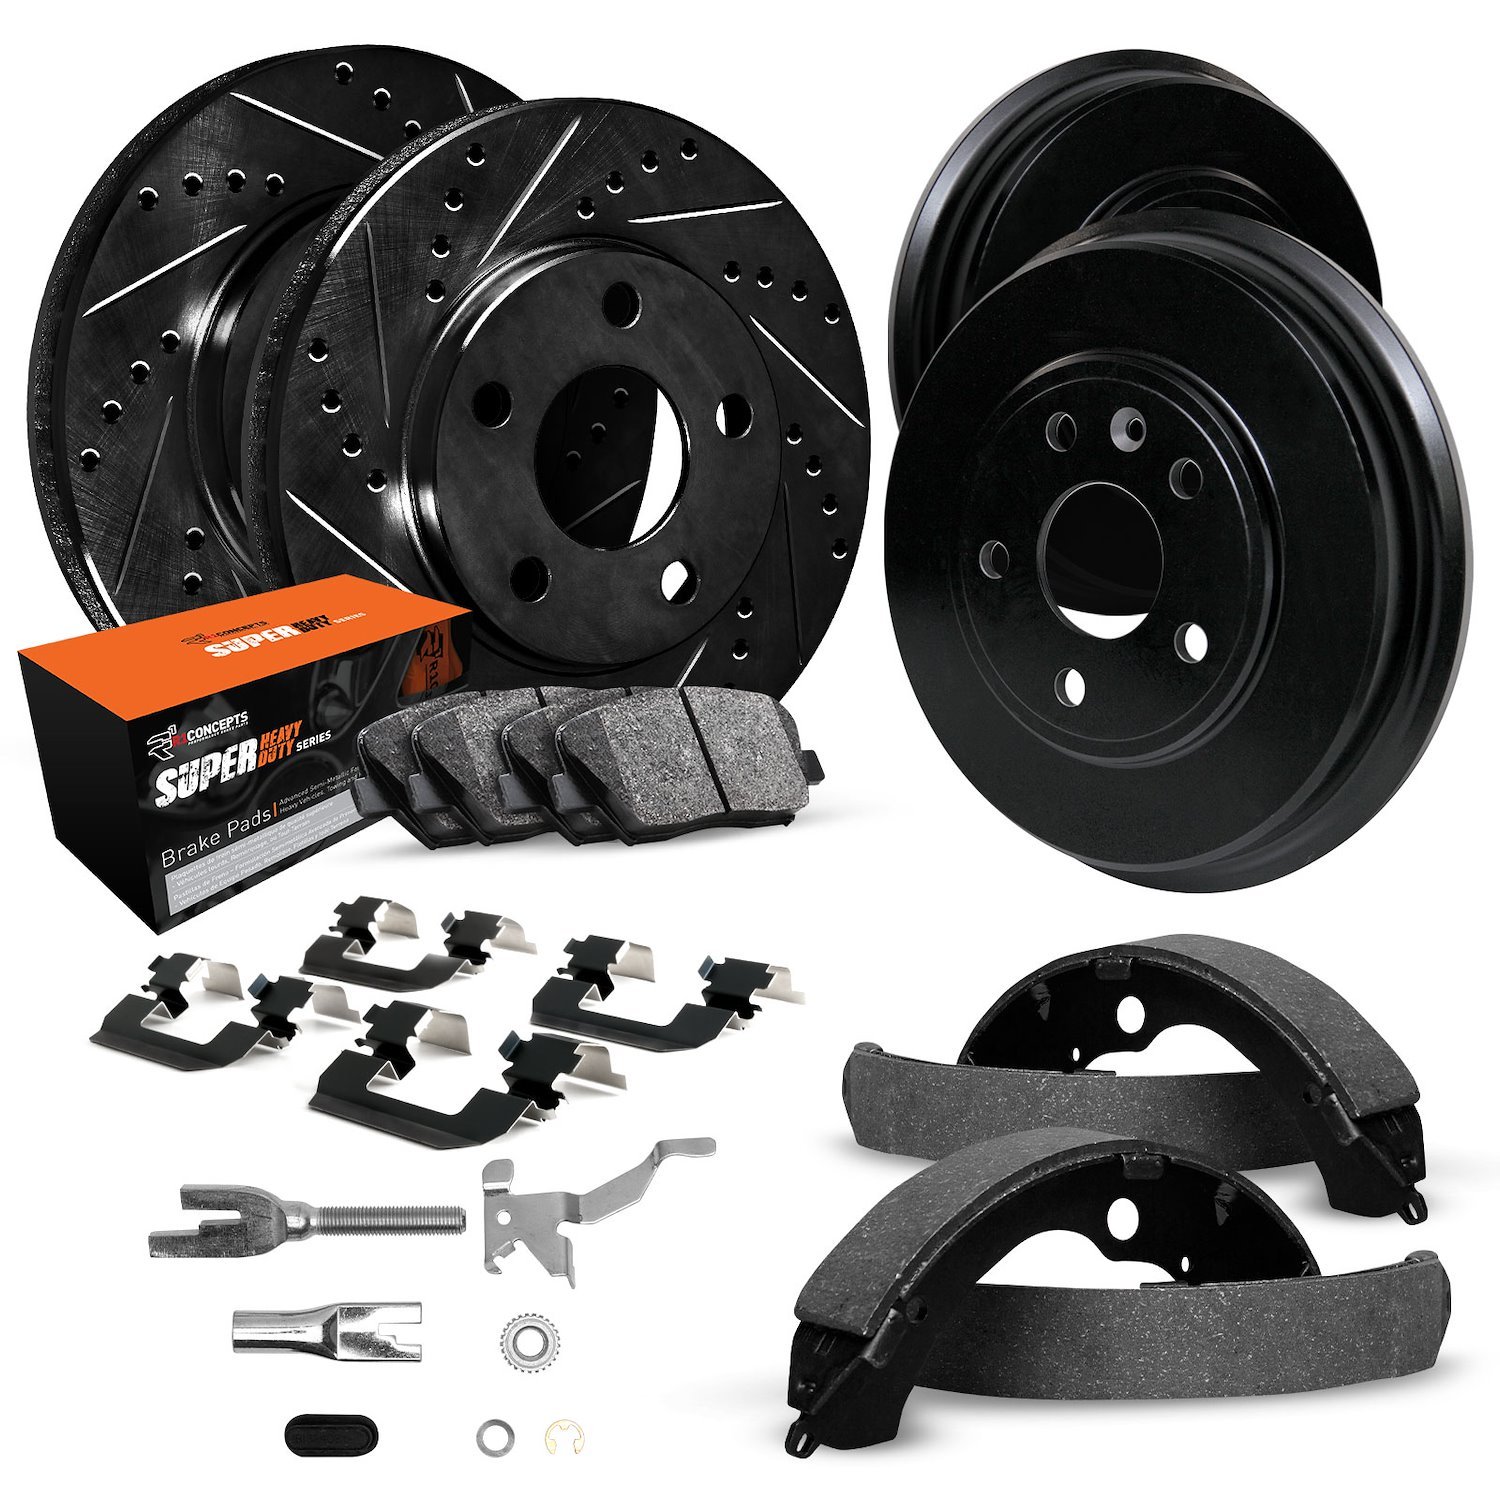 E-Line Slotted Black Brake Rotor & Drum Set w/Super-Duty Pads, Shoes, Hardware/Adjusters, 1995-1999 Ford/Lincoln/Mercury/Mazda